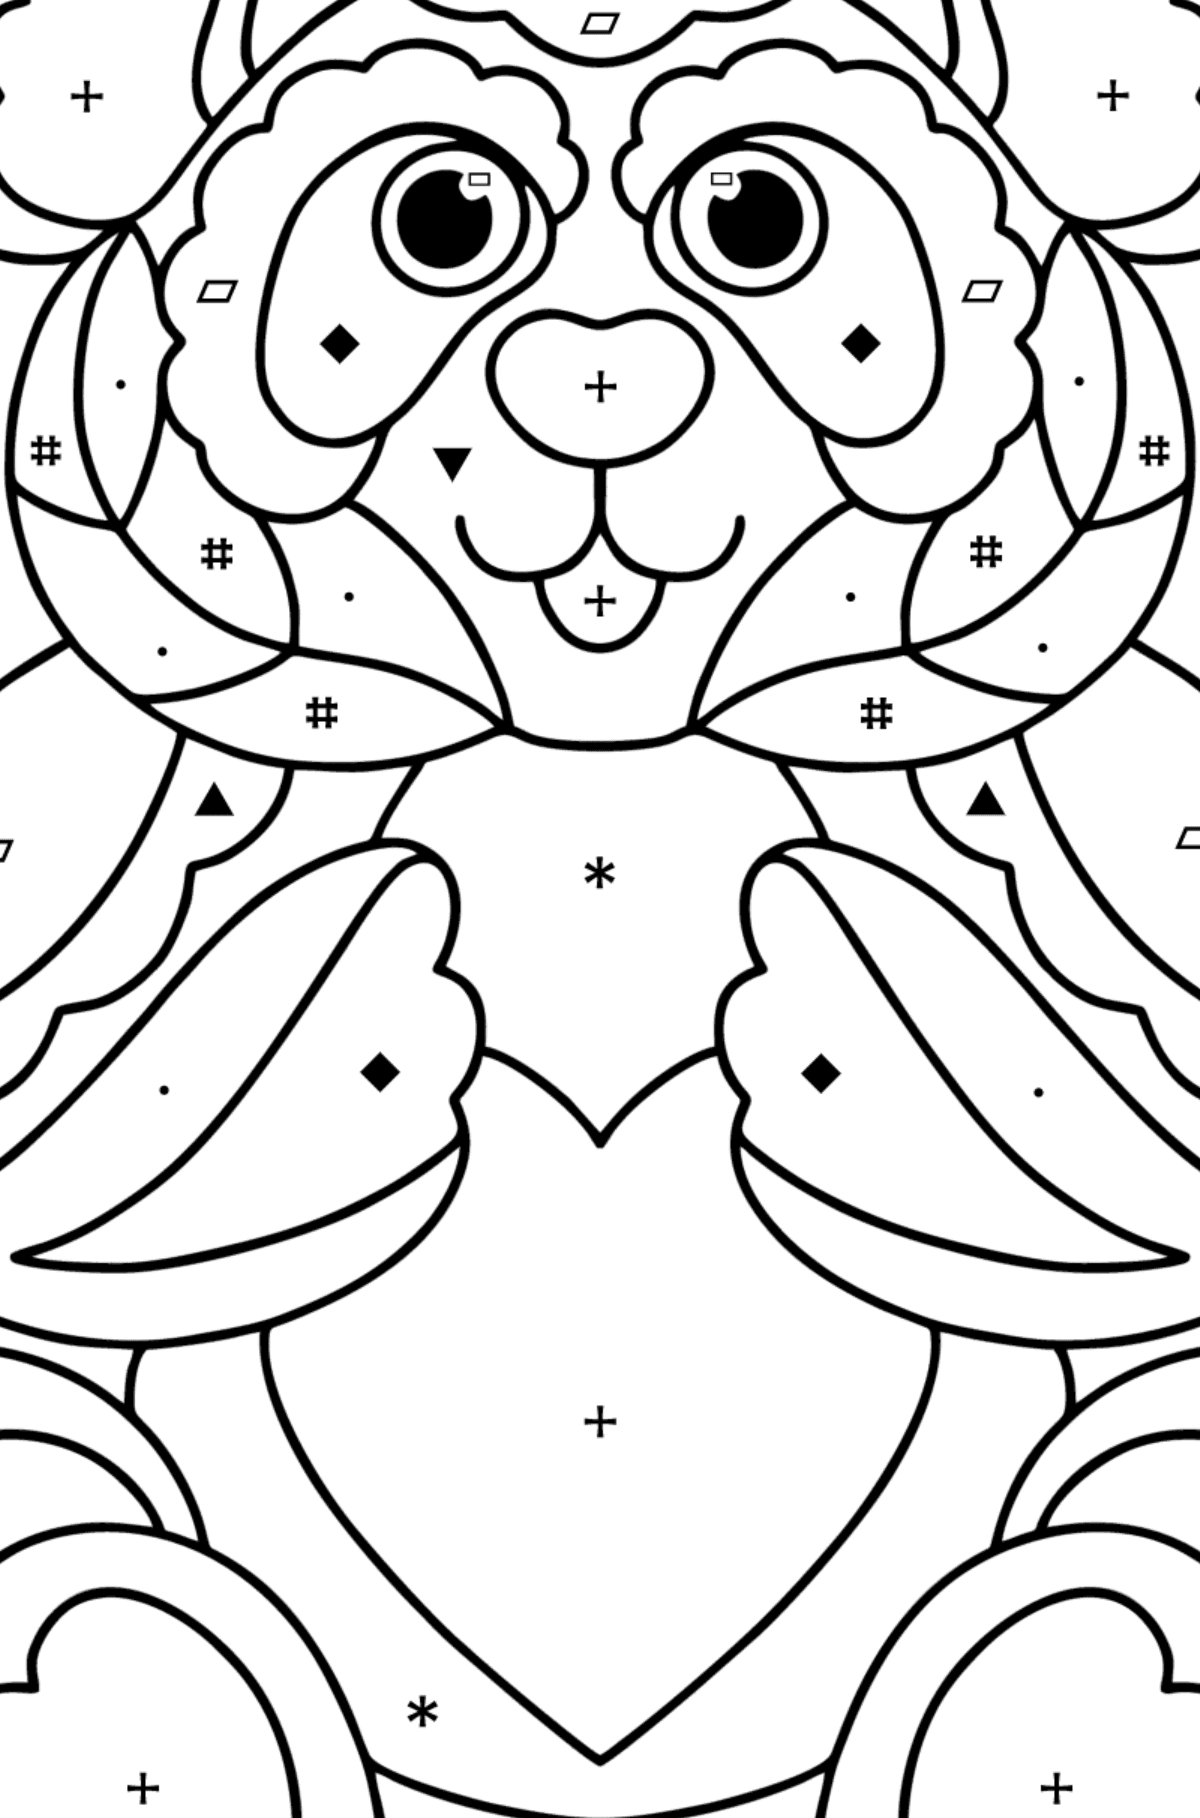 Panda antistress coloring page - Coloring by Symbols and Geometric Shapes for Kids